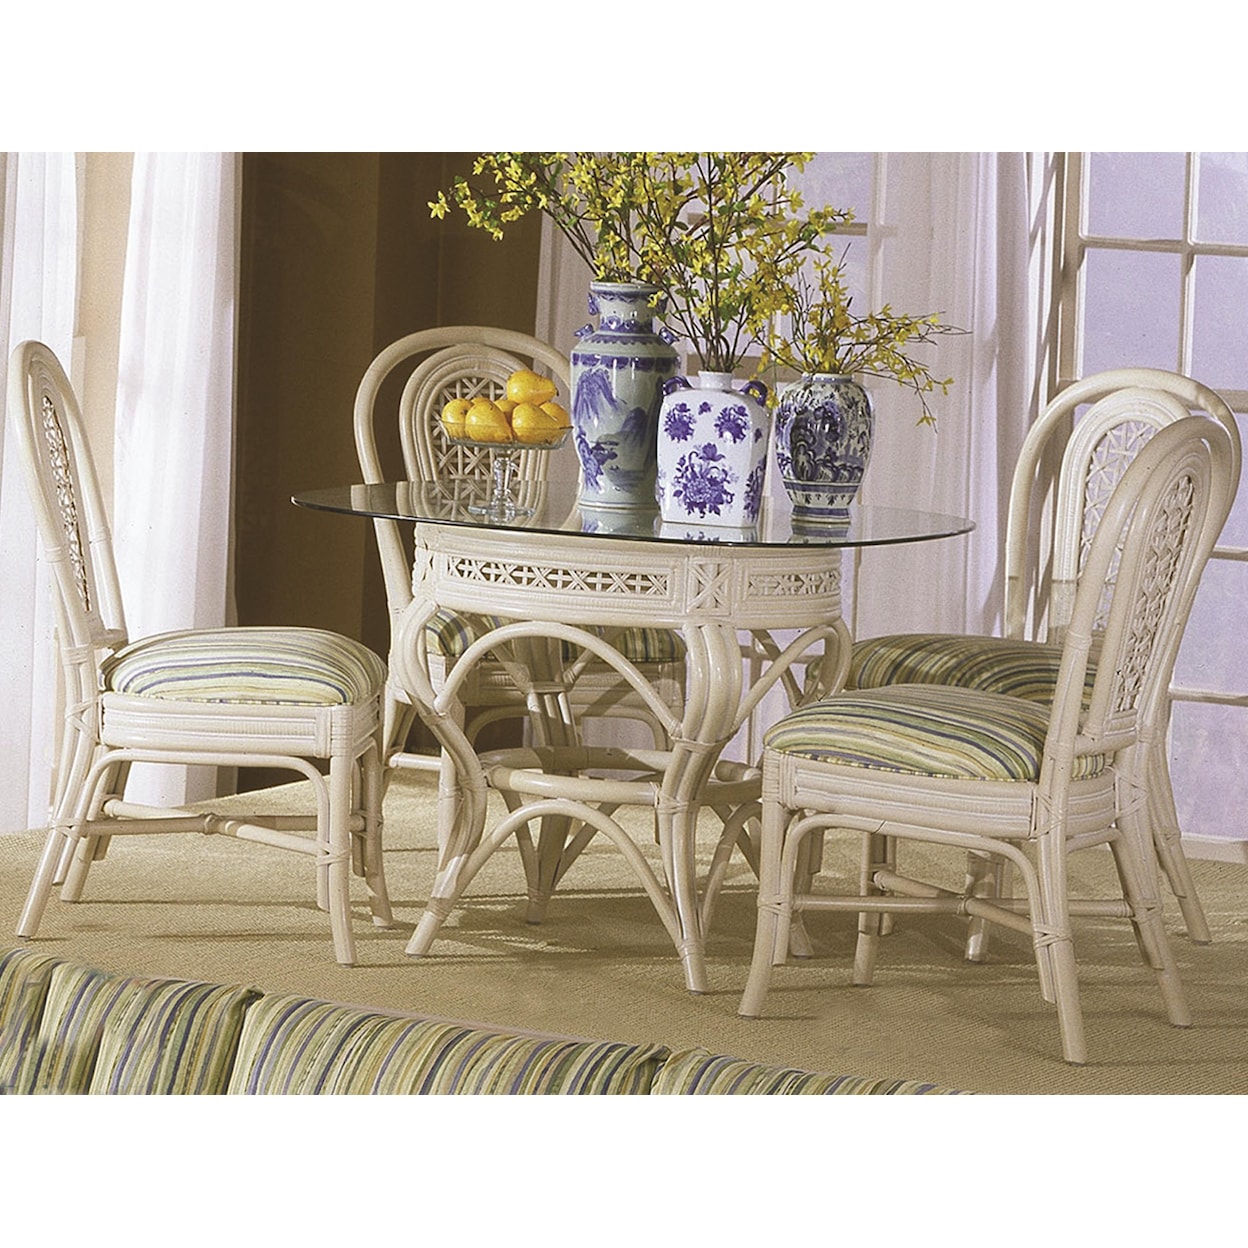 Capris Furniture 341 Collection Wicker Rattan Kitchen Table